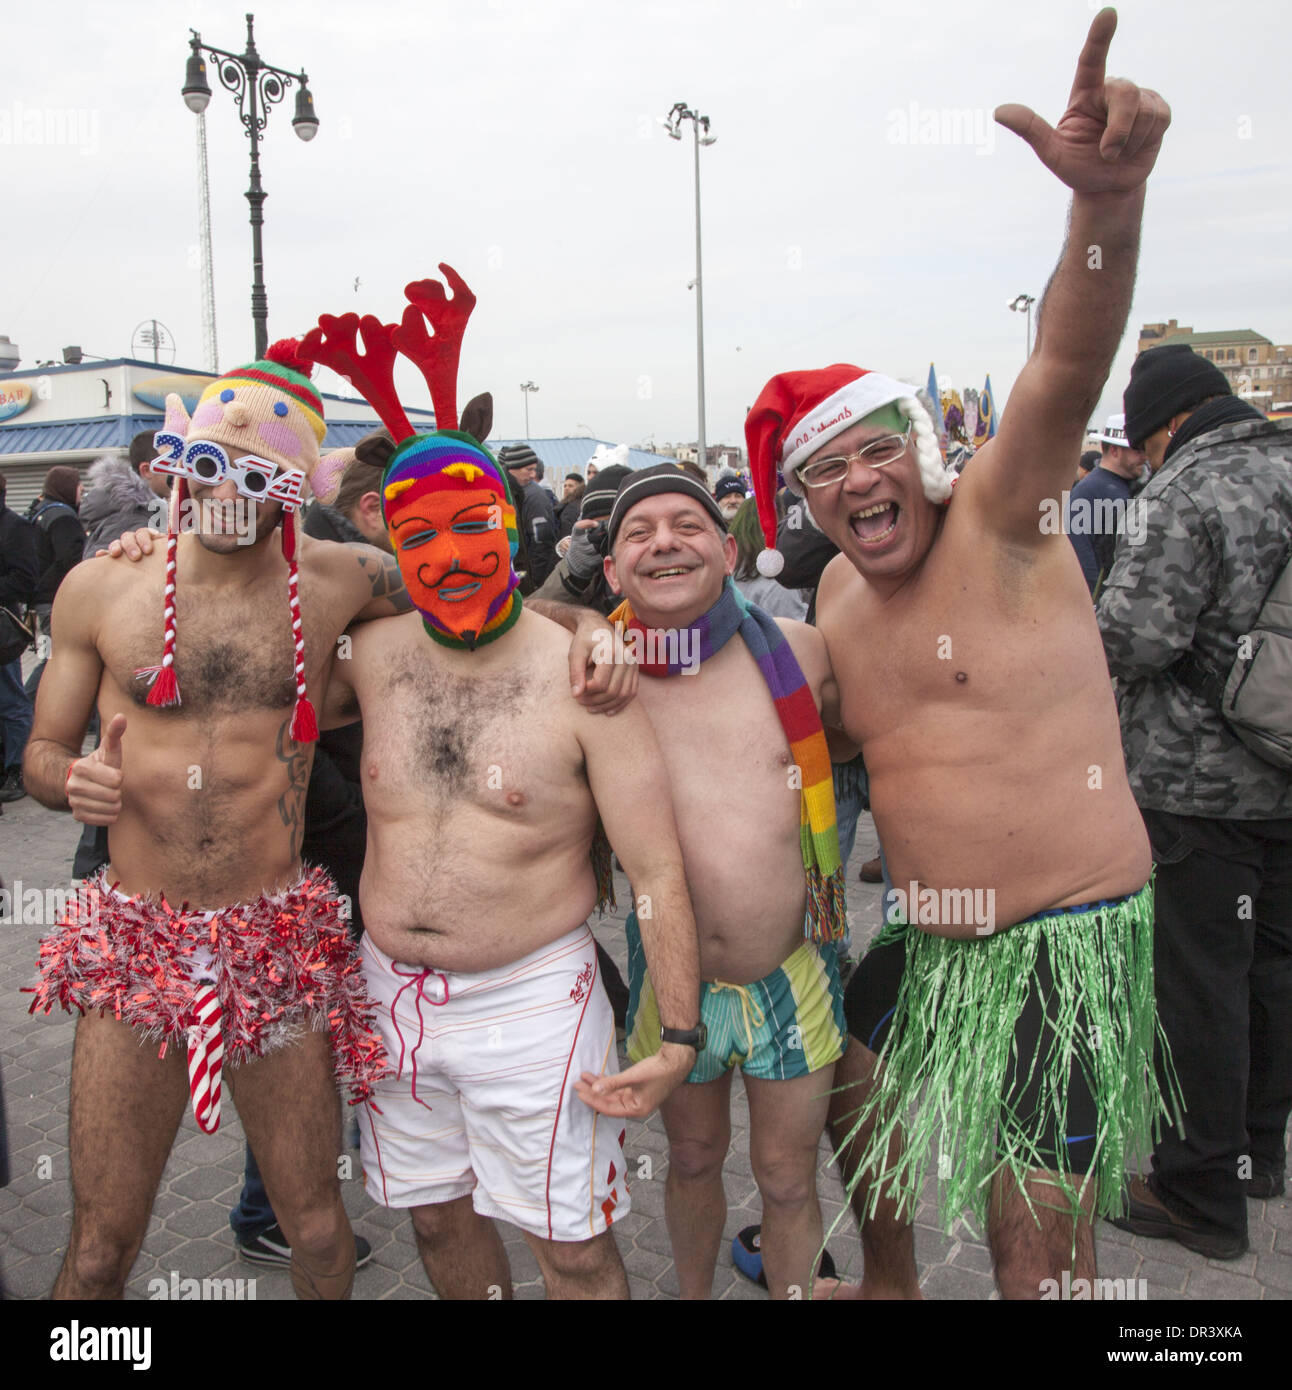 All sorts of people came out for the annual Polar Bear Club New Years Day 2014 plunge into the icy Atlantic at Coney Island. Stock Photo